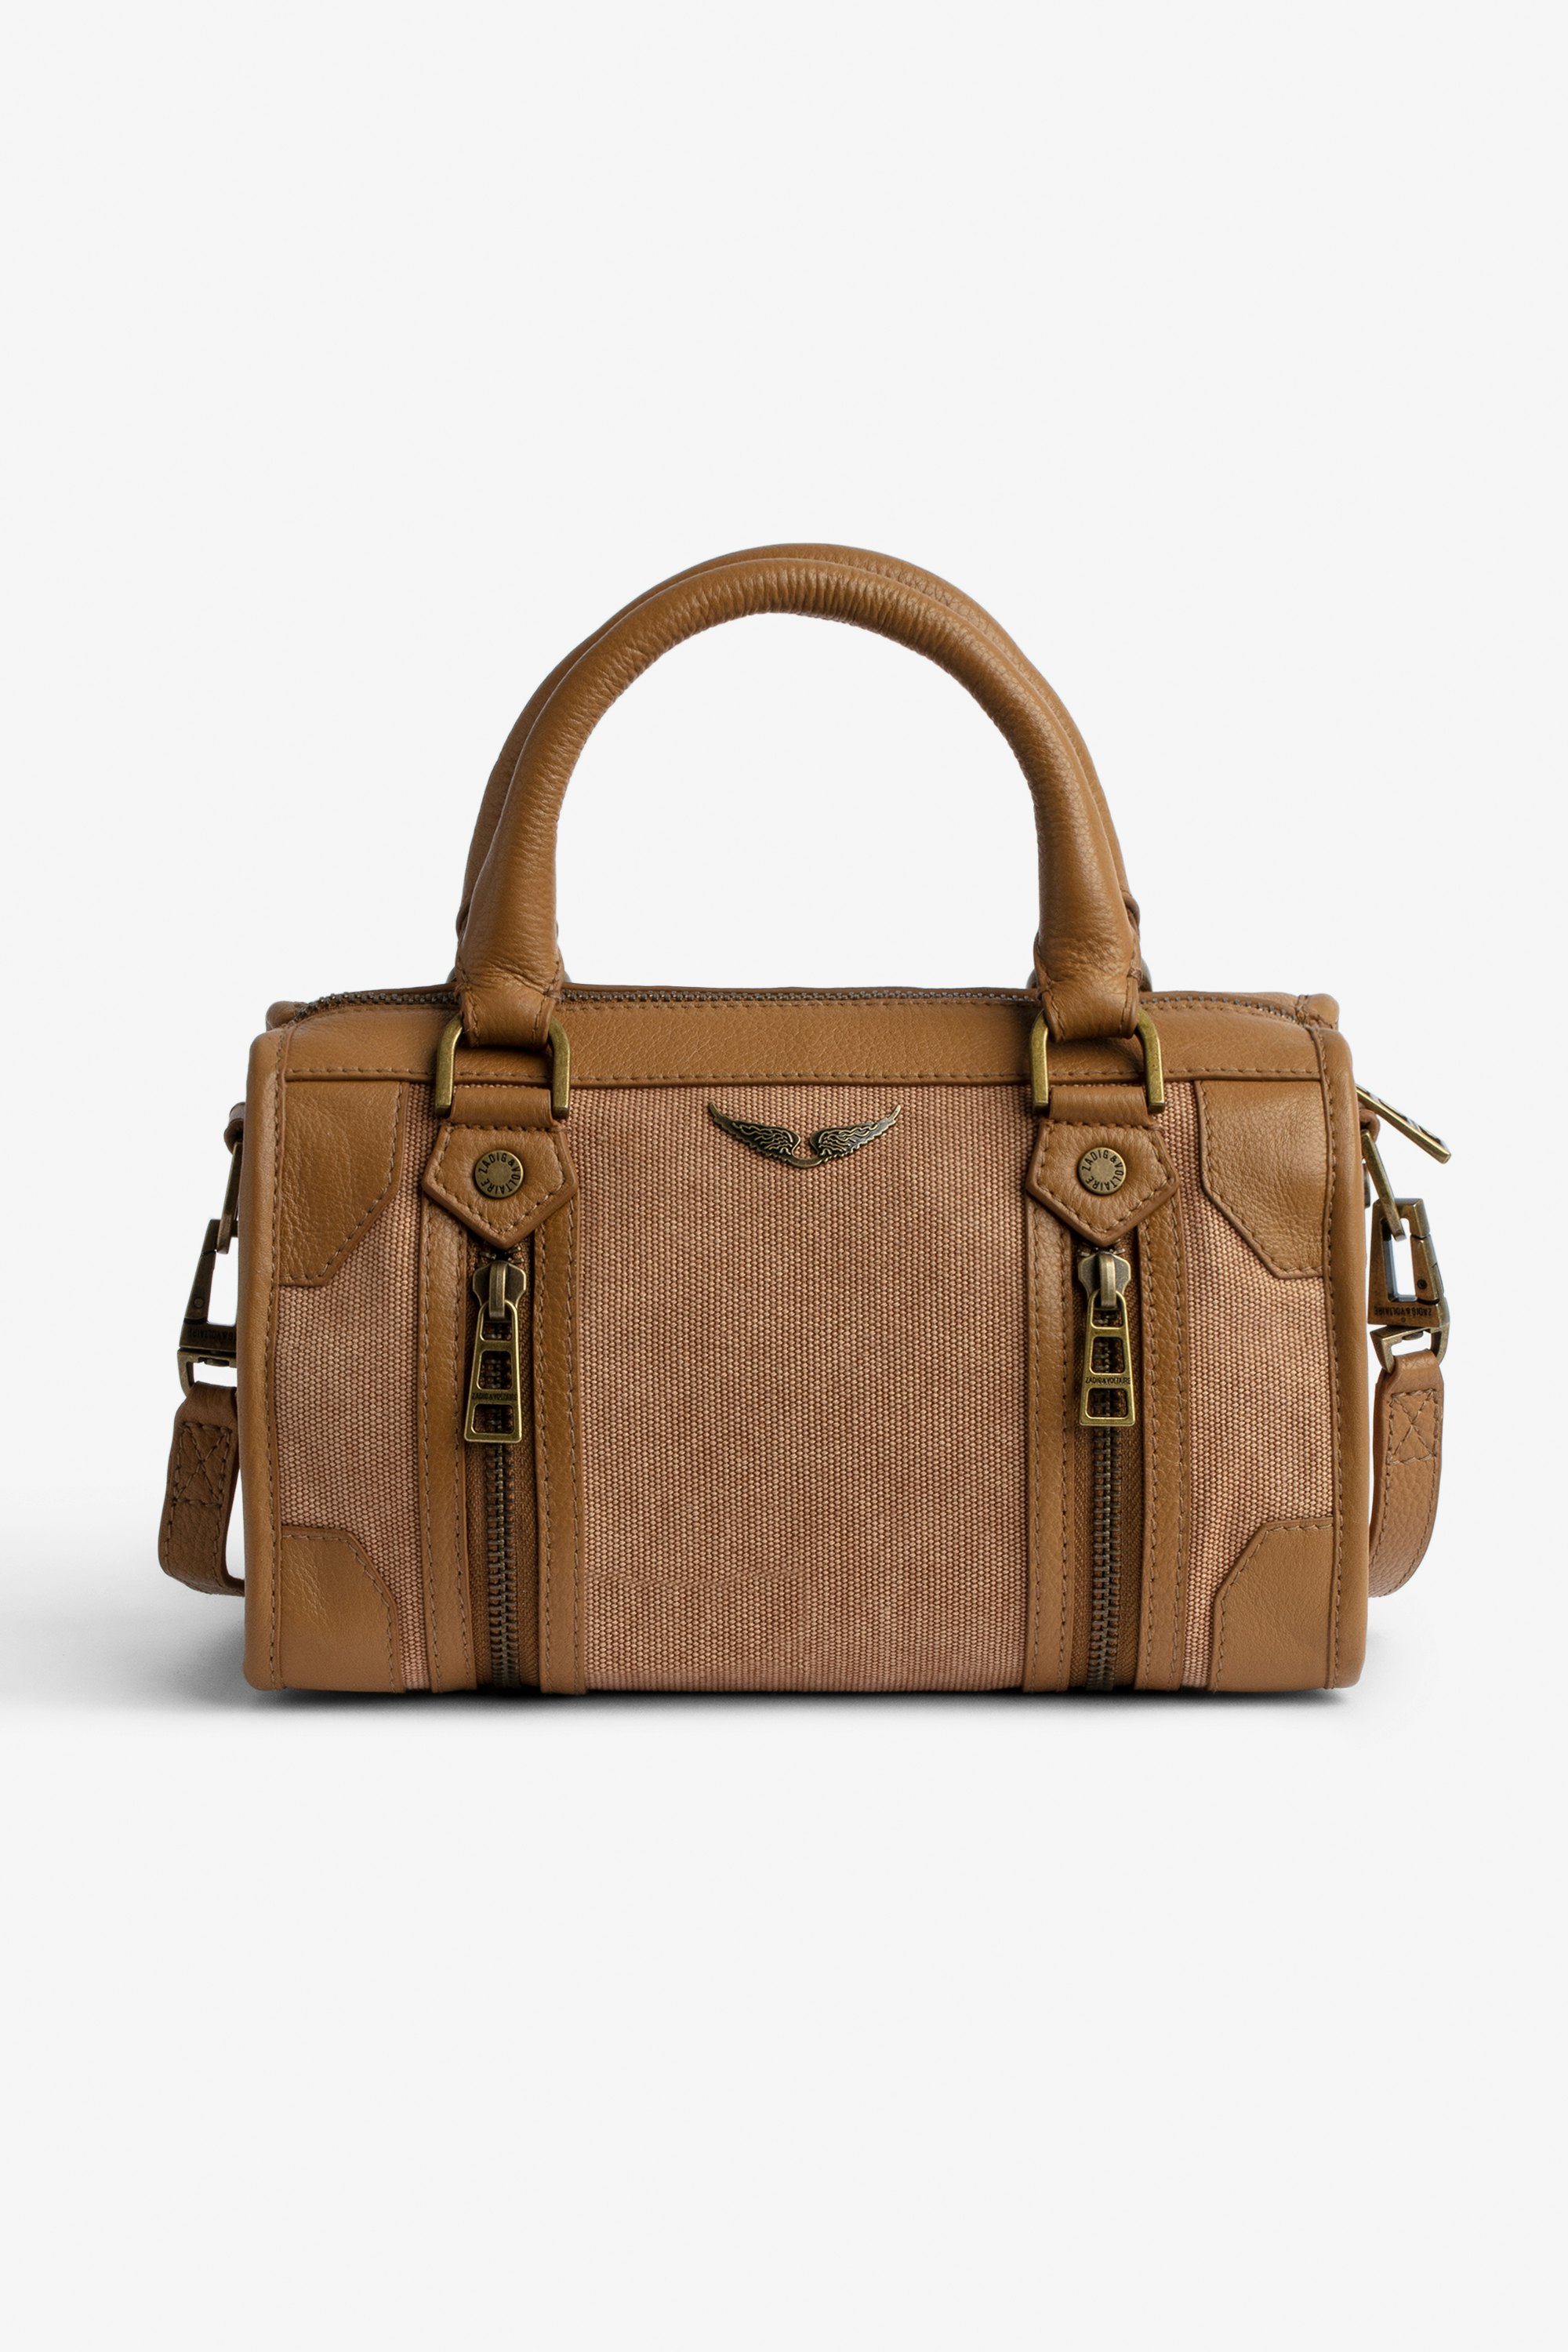 XS Sunny #2 Bag Women's Voltaire small bag in camel cotton canvas and leather with handle and shoulder strap